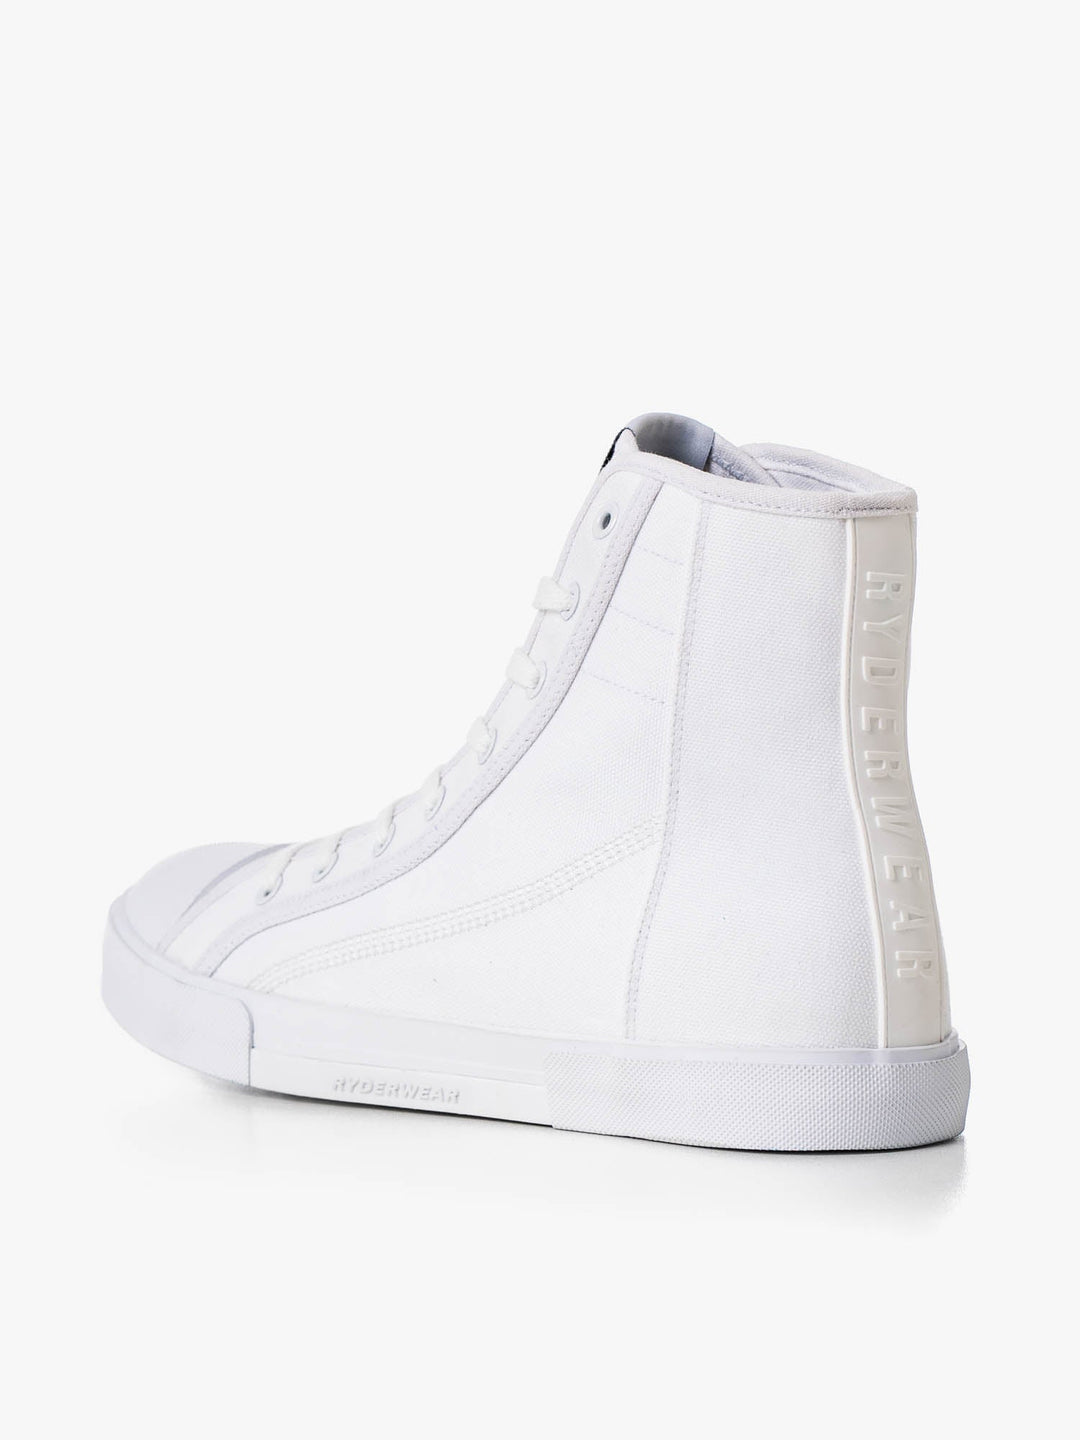 Vulcanised High Top - White Shoes Ryderwear 